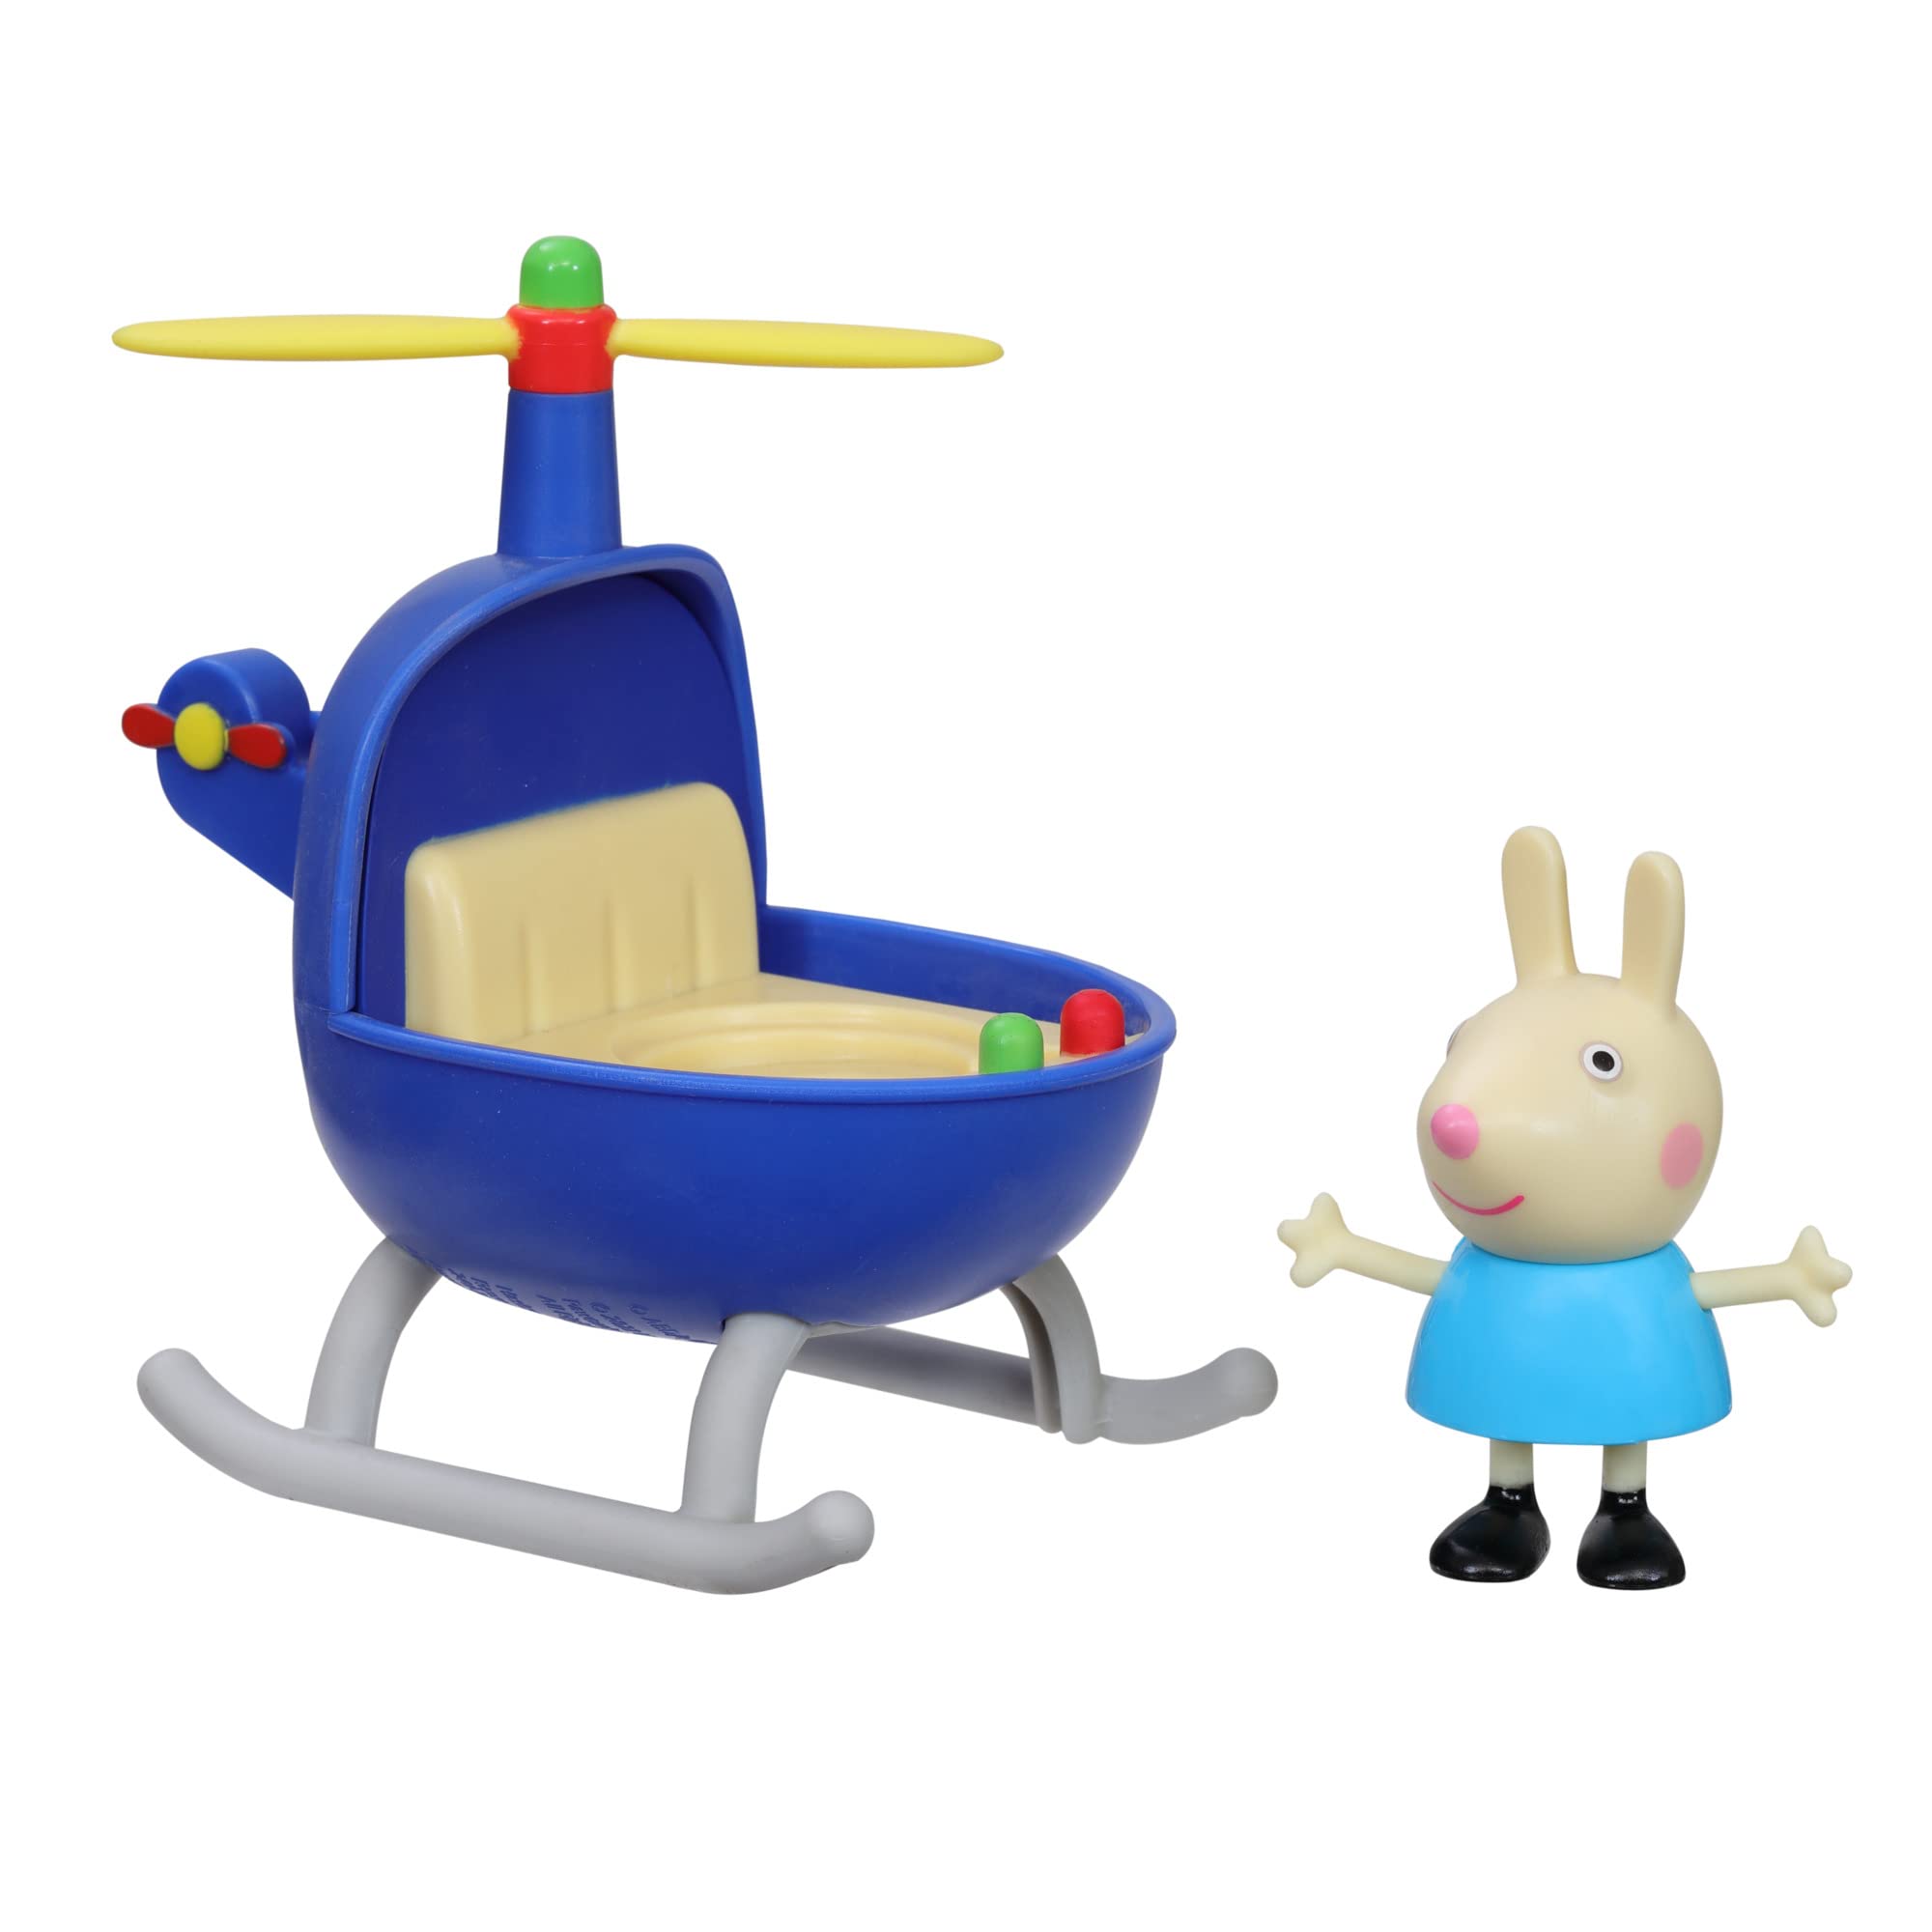 Peppa Pig Peppa's Adventures Little Helicopter Toy Includes 3-inch Rebecca Rabbit Figure $5.60 + Free Shipping w/ Prime or on $35+